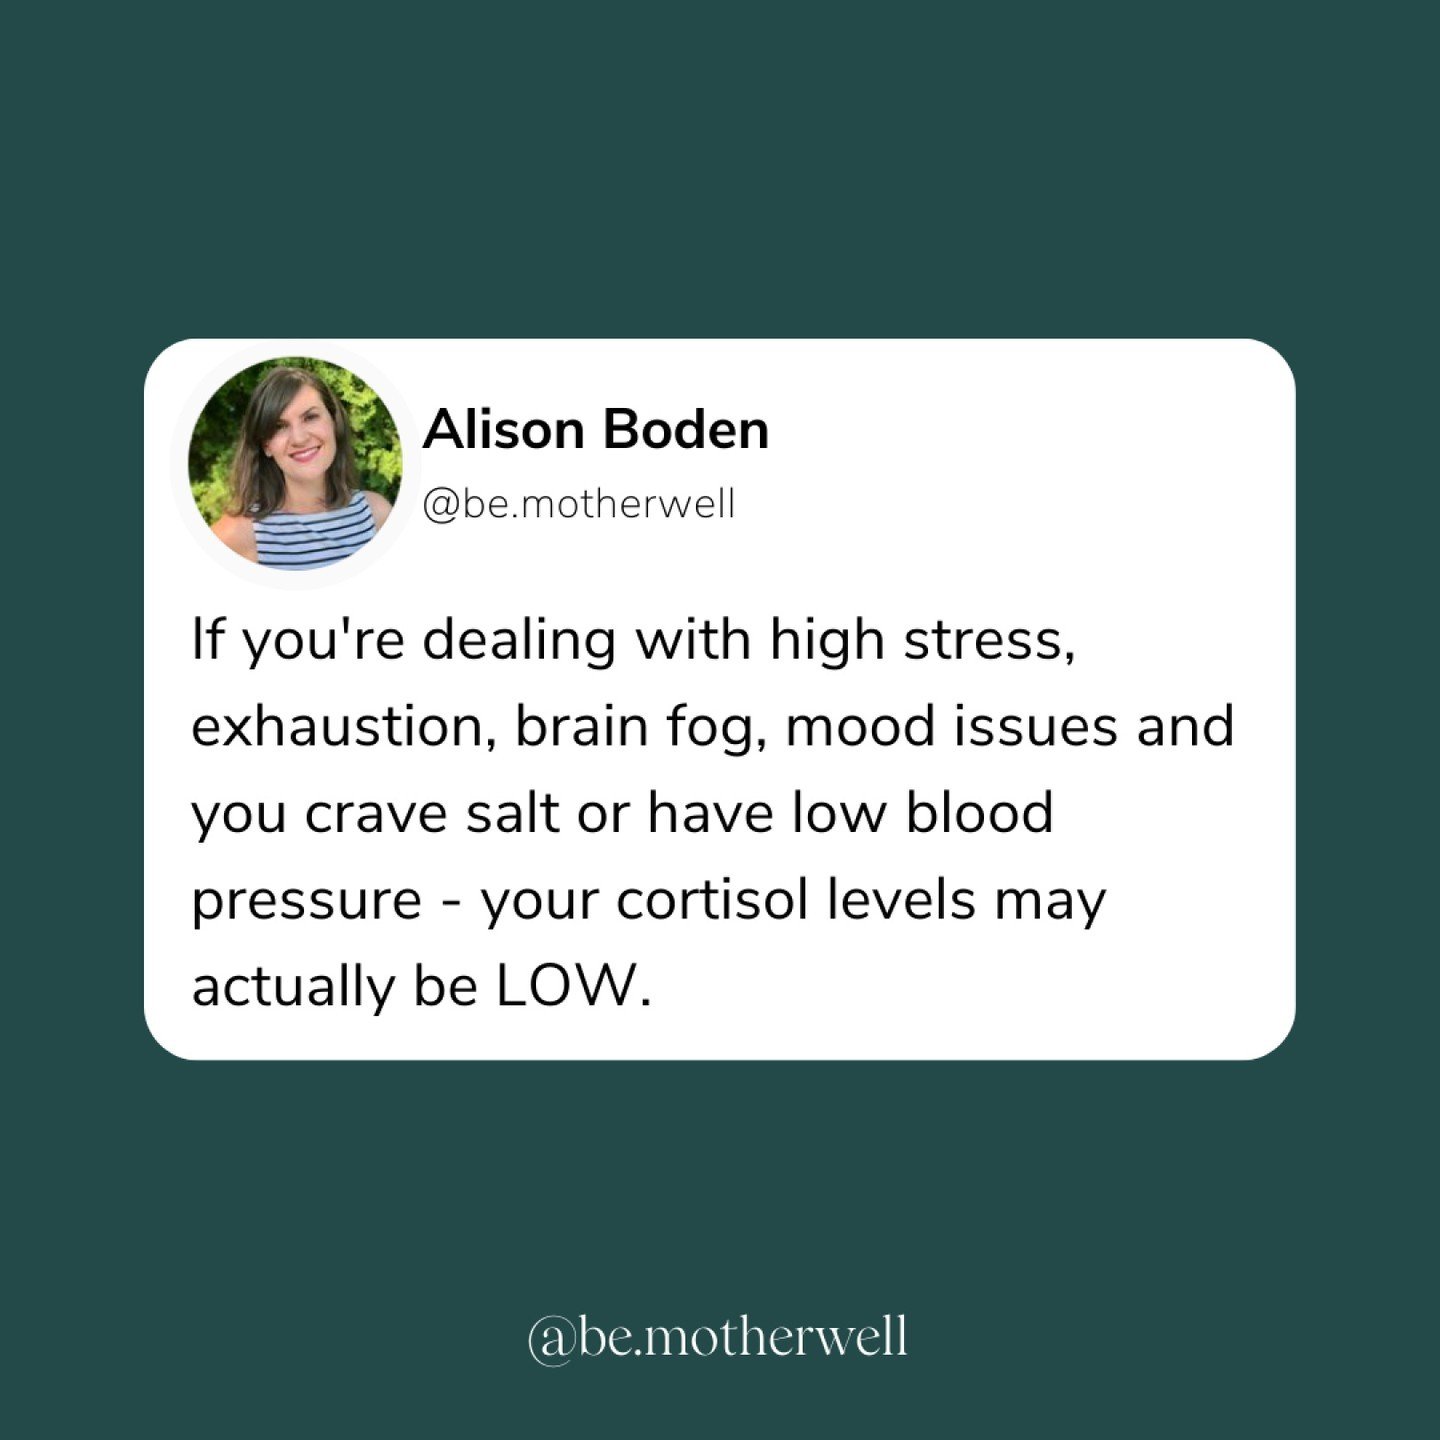 We talk so much about high cortisol - but what about LOW cortisol?⁠

When I run hormone labs on my mama clients, I find so many instances of low cortisol - actually more than high! Cortisol gets low right around that &quot;burnout&quot; stage, and th